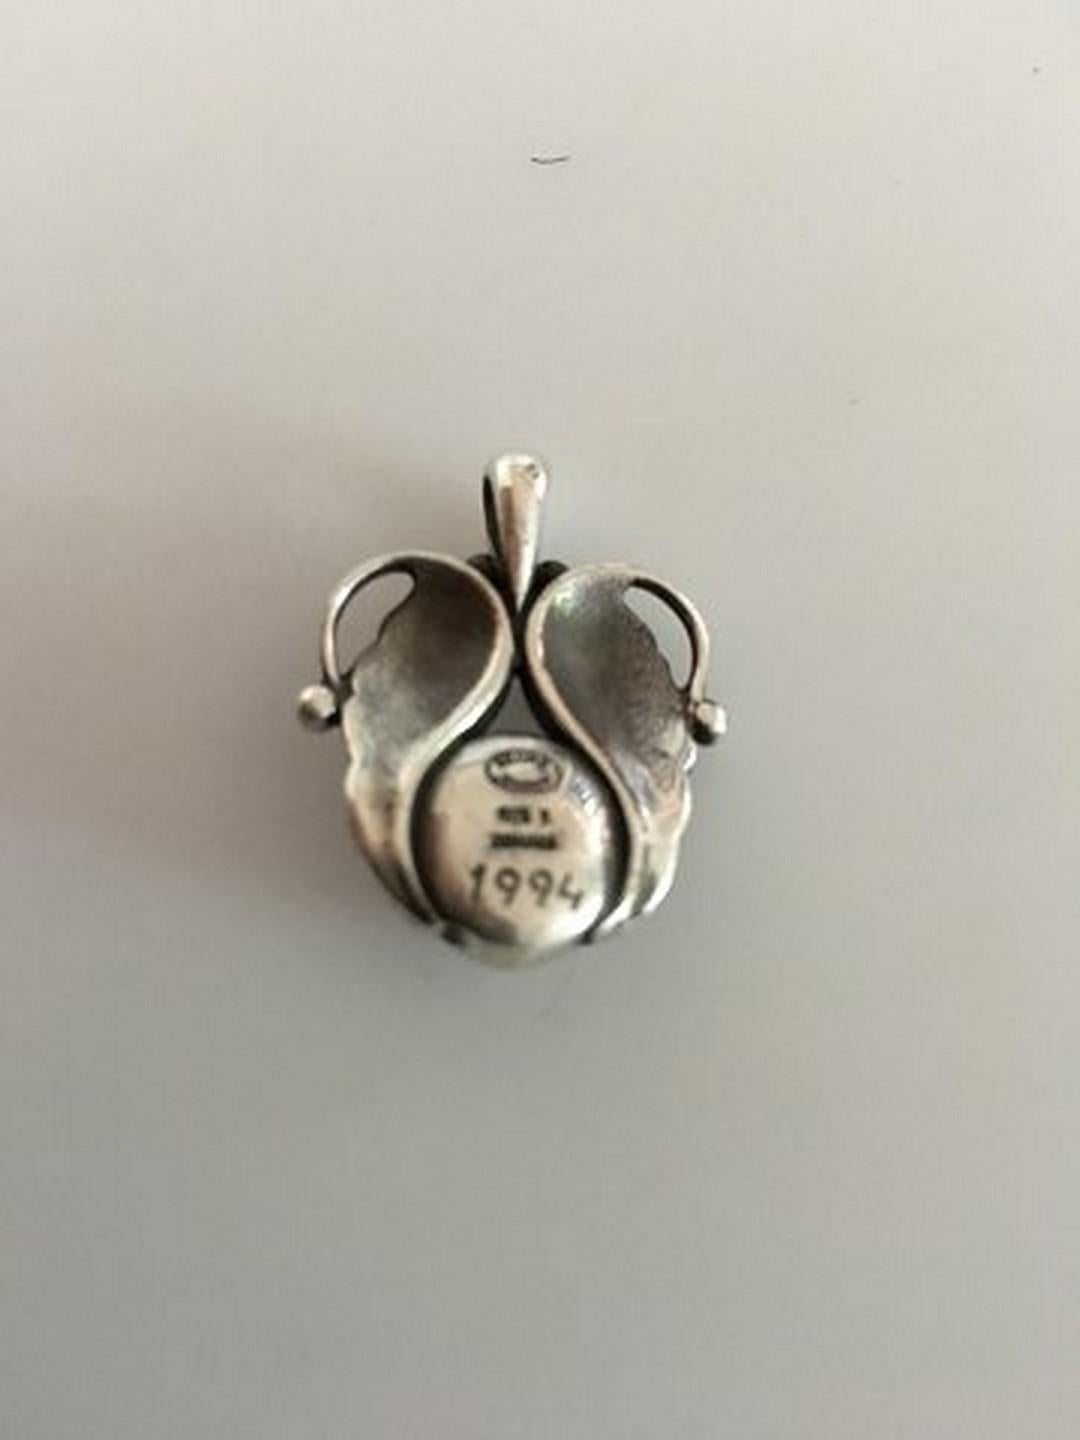 Georg Jensen Annual Pendent in Sterling Silver 1995. Measures 3 cm / 1 3/16 in. Weighs 9.8 g / 0.35 oz.